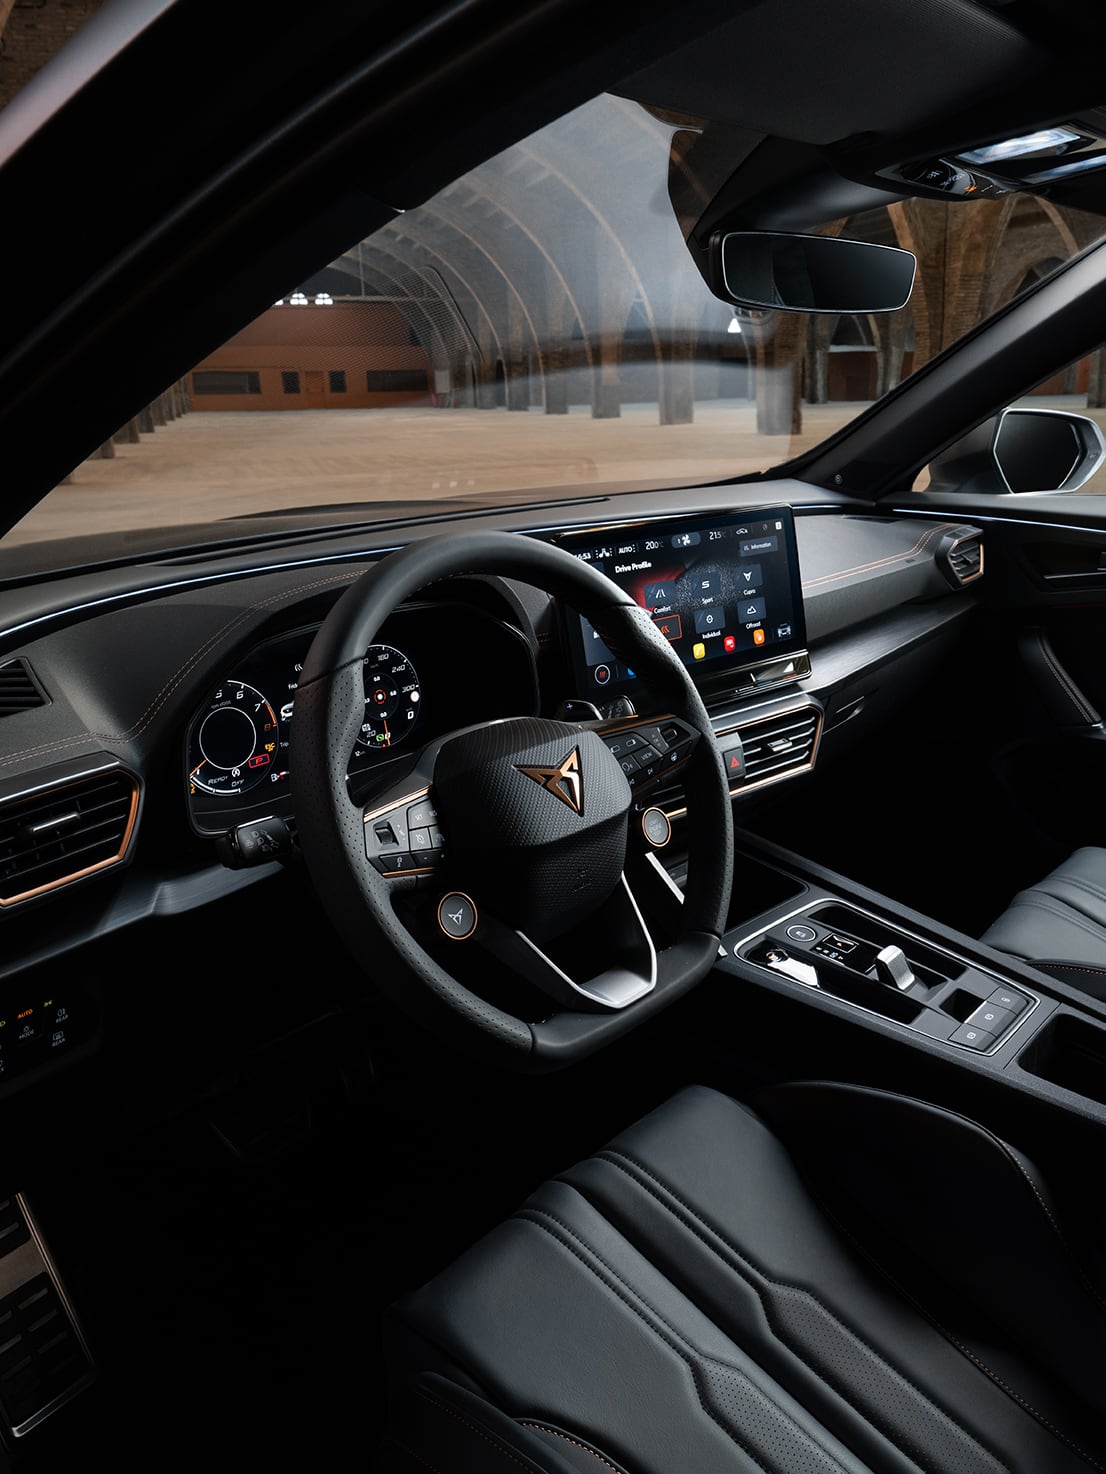 interior-view-of-cupra-formentor-vz5-of-the-leather-dashboard.jpg